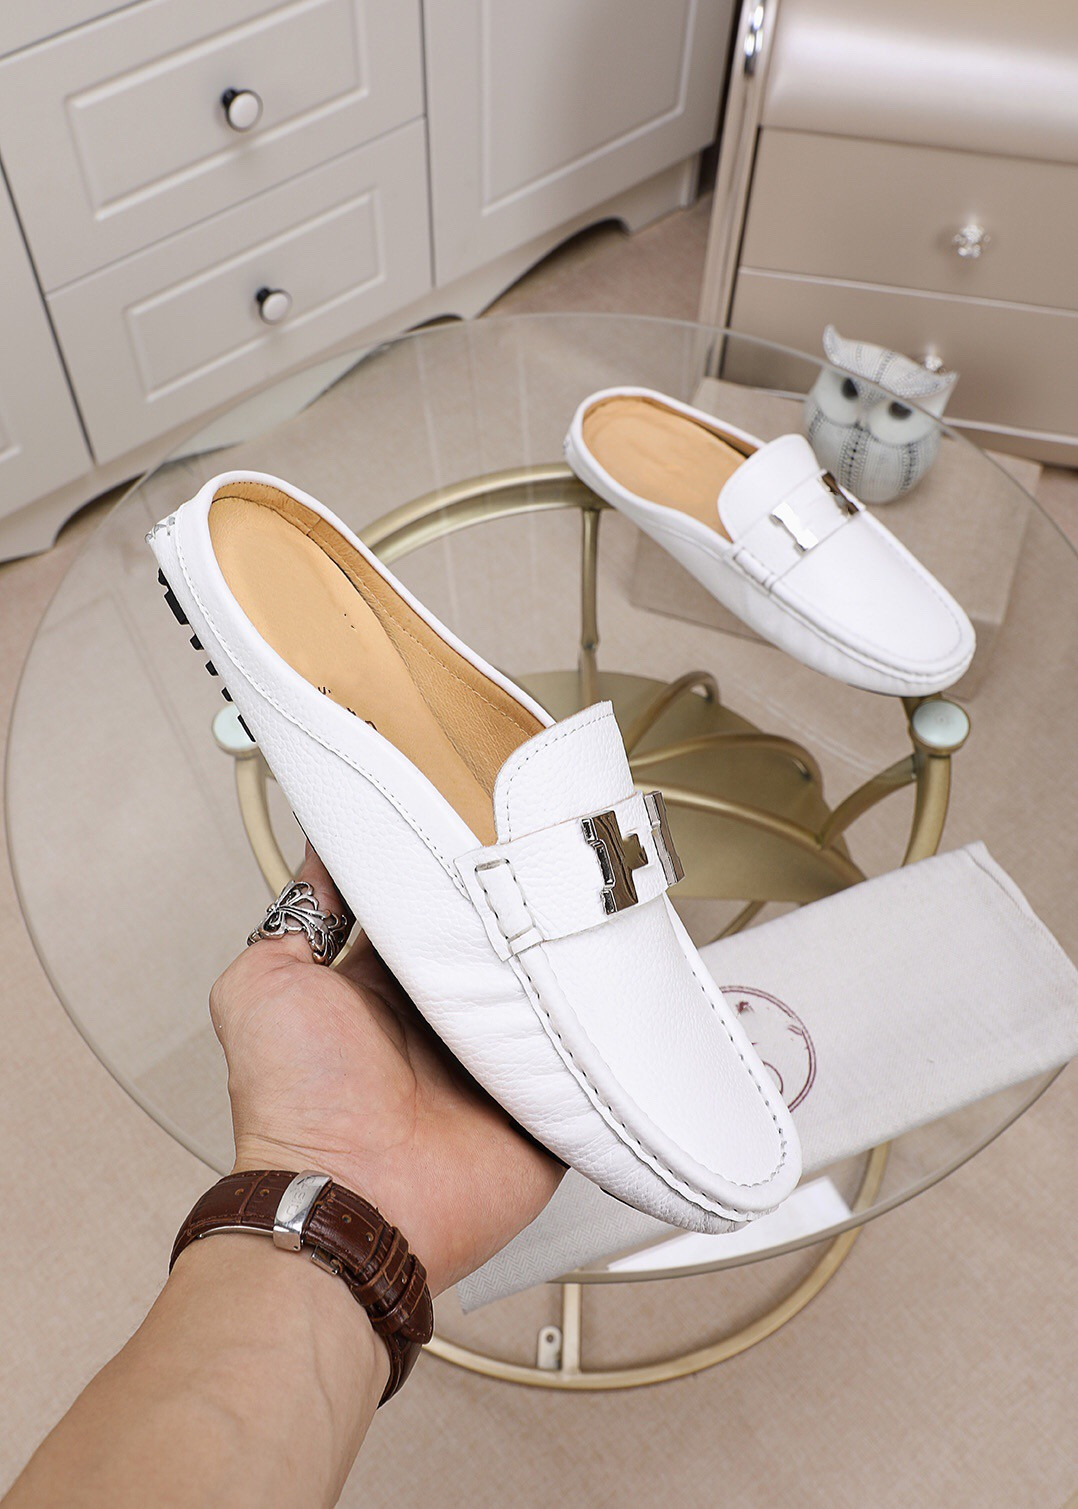 2021 100% Leather men half slippers Princeton loafers soft cowhide Lazy women shoes Metal buckle beach slides Mules Princetown Classic Size 38-44 with box